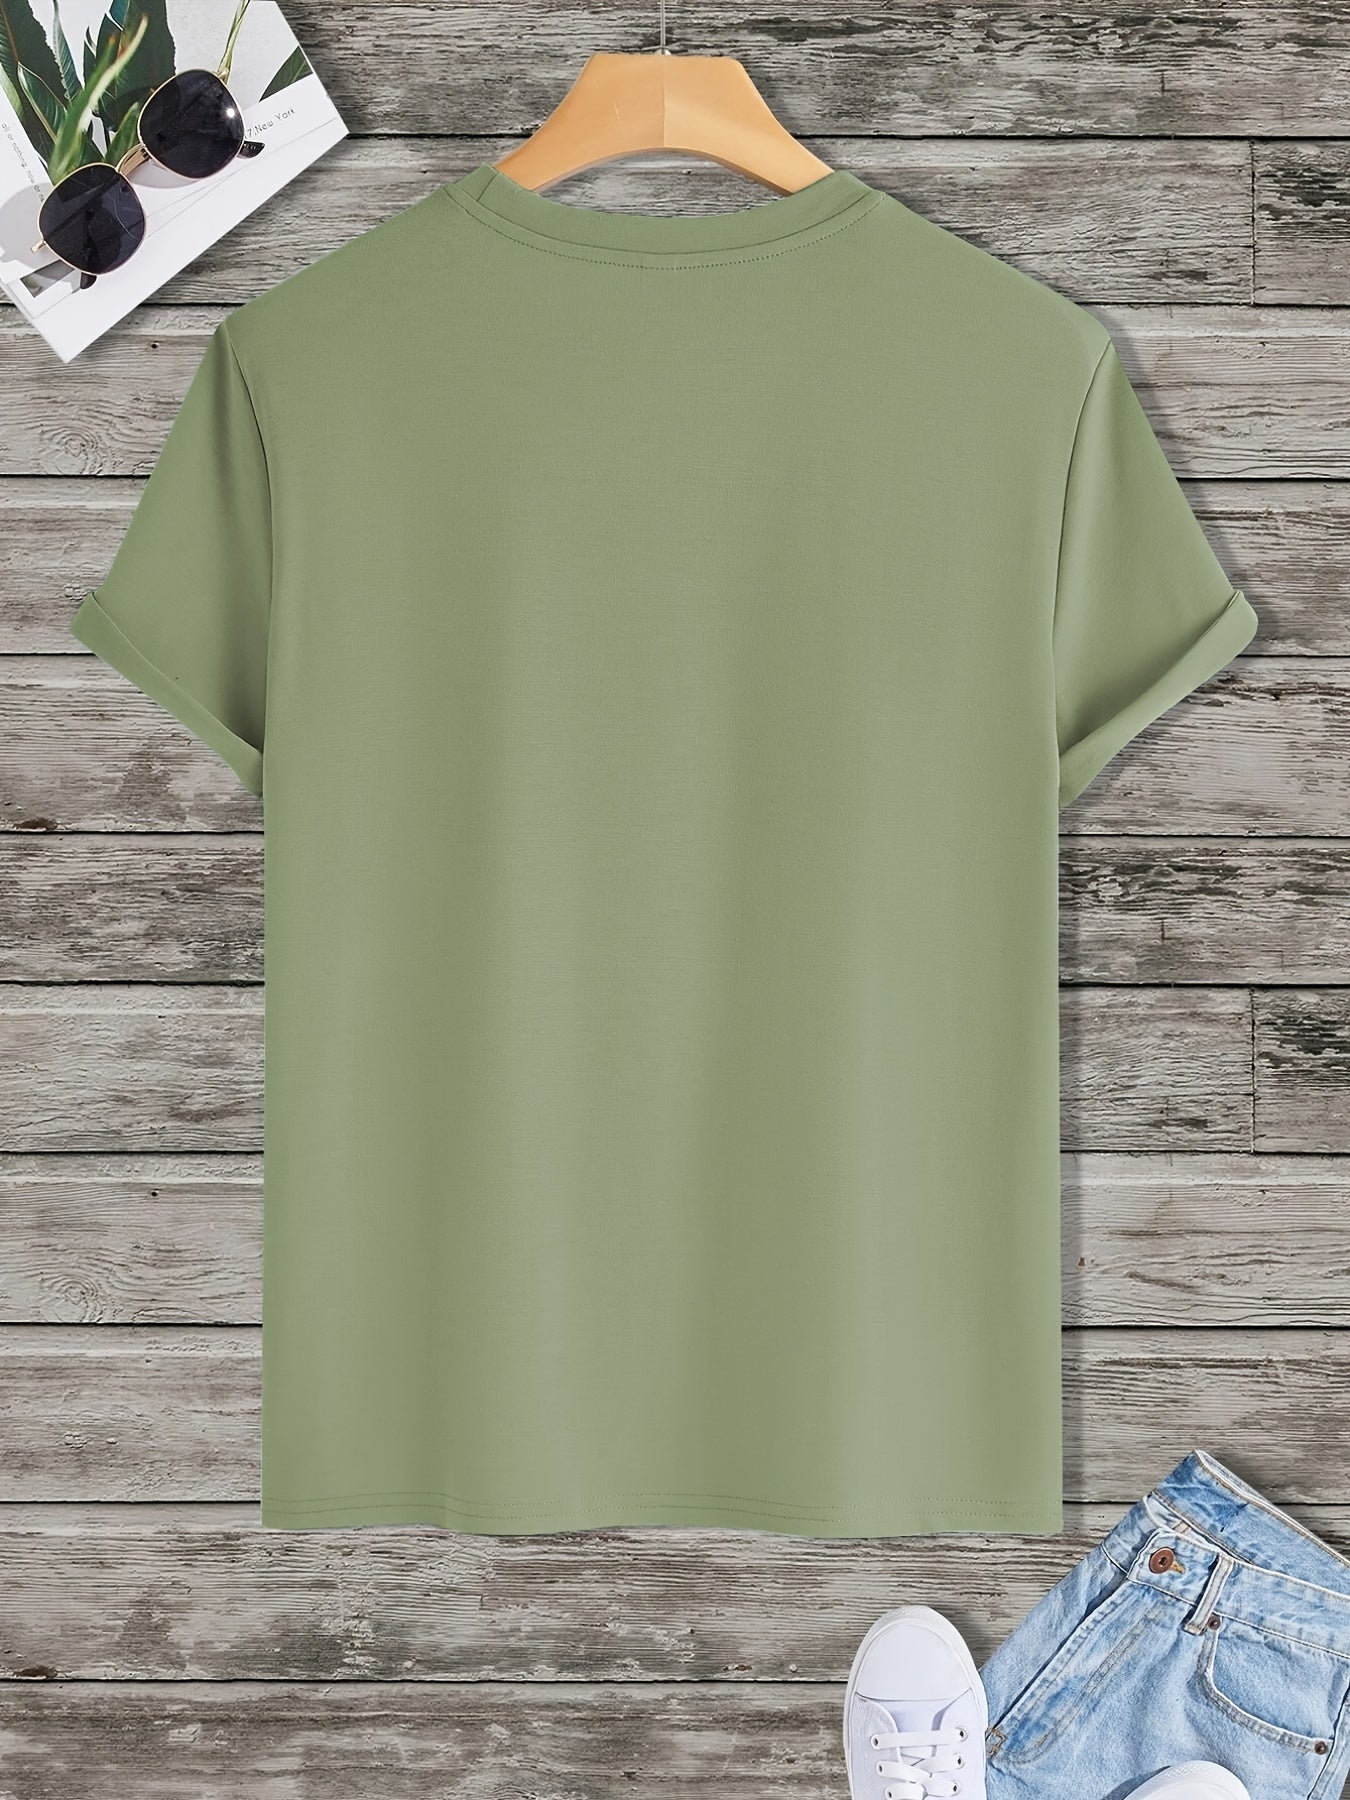 ' It's OK Don't Worry ' Men's Casual Tee